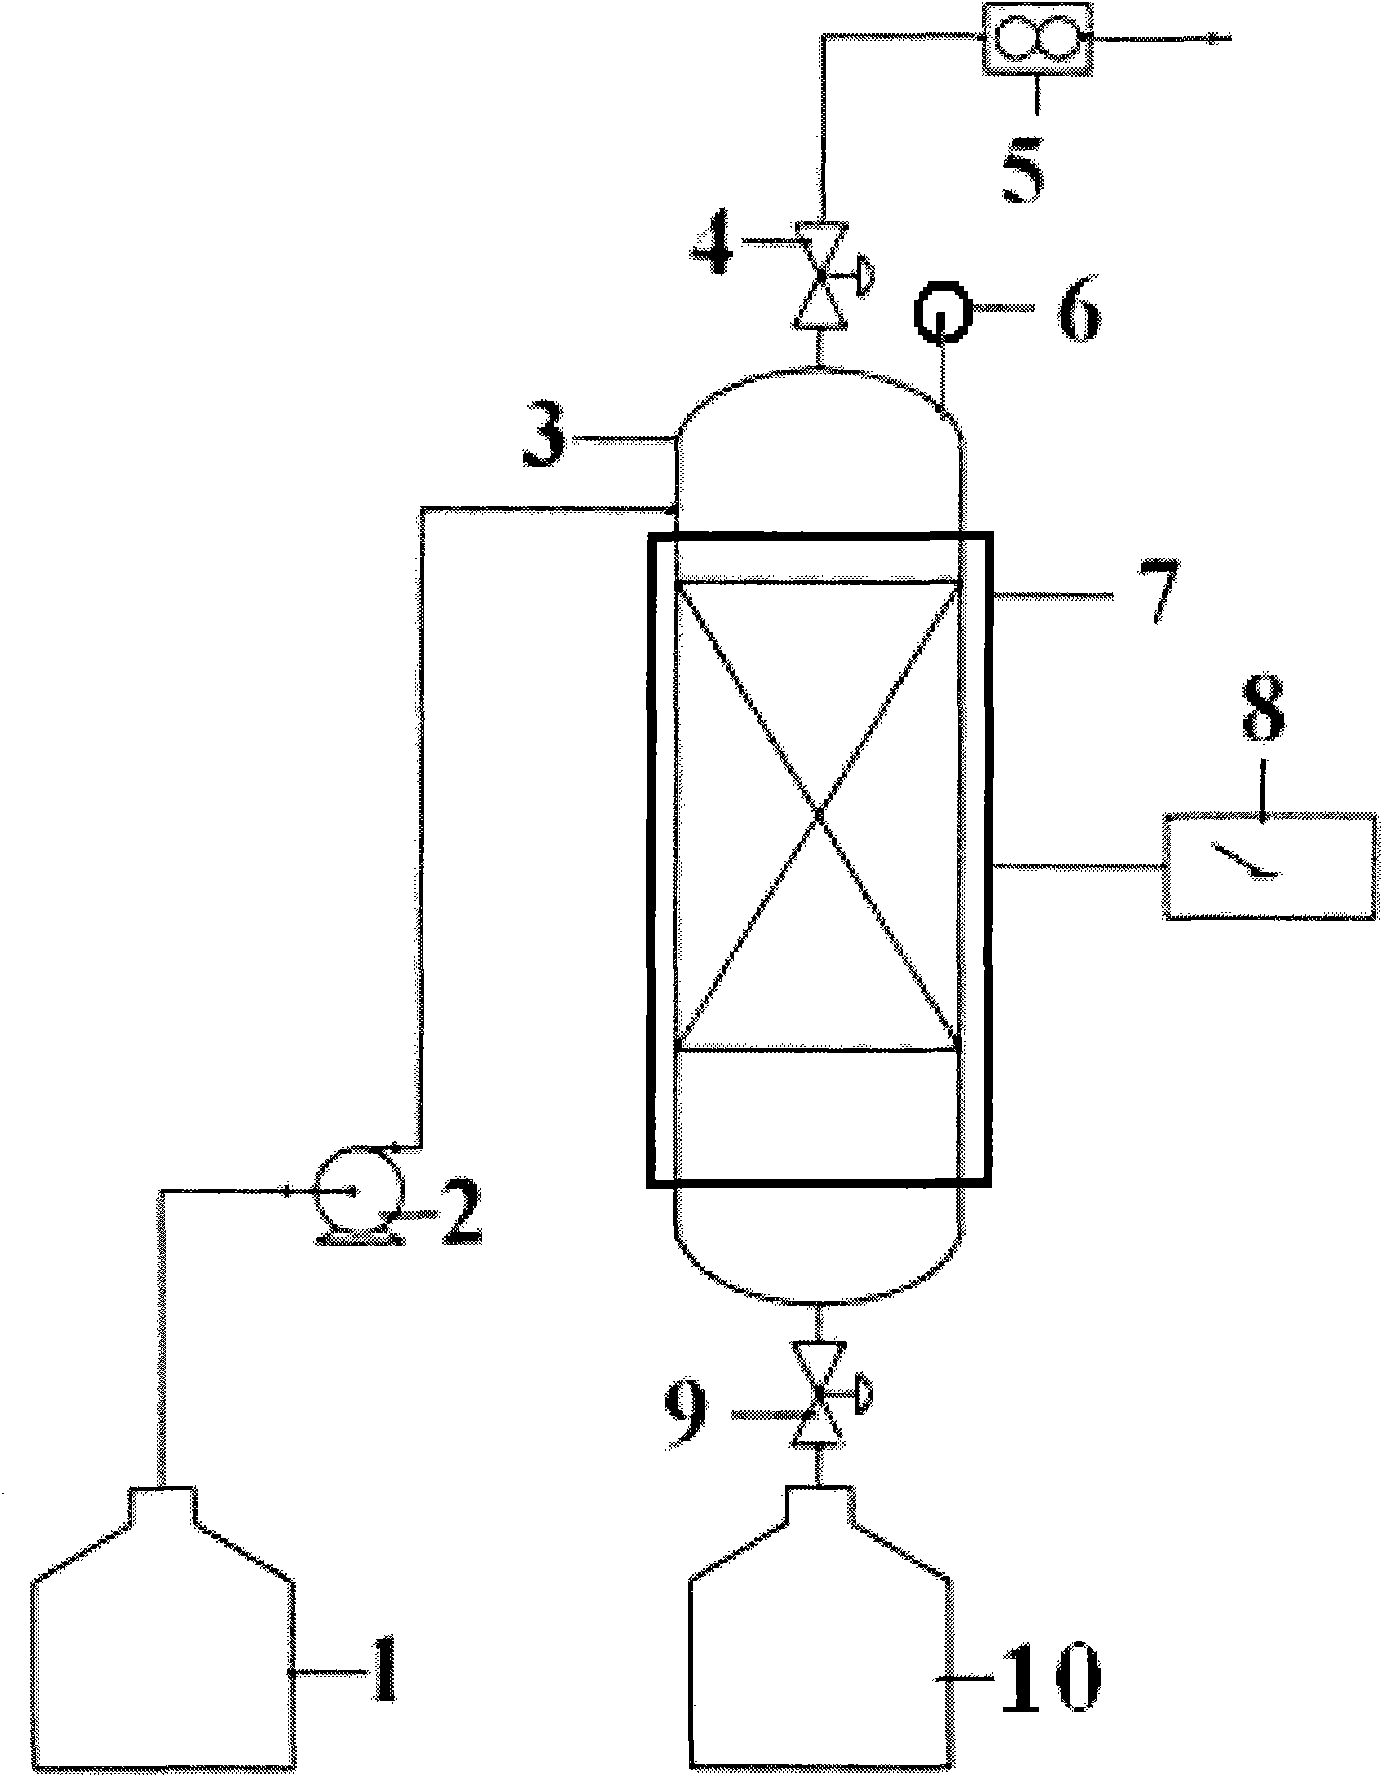 Process and device for purifying sulfuric acid phase in iodine and sulfur cycle under low pressure